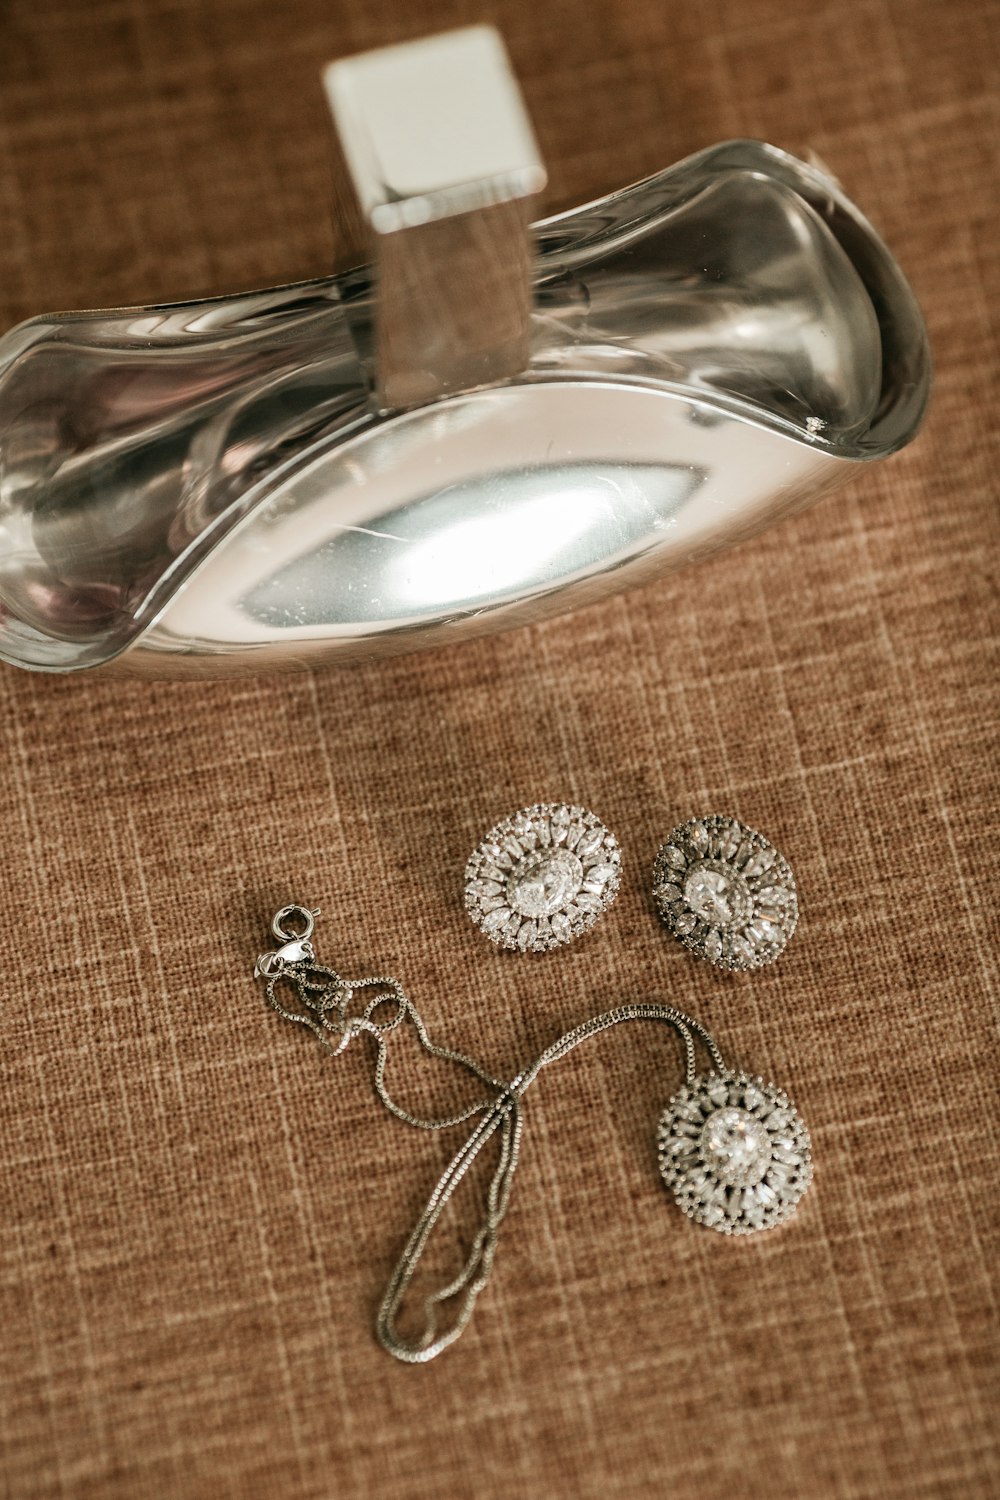 a pair of dandelions and a pair of earrings on a table